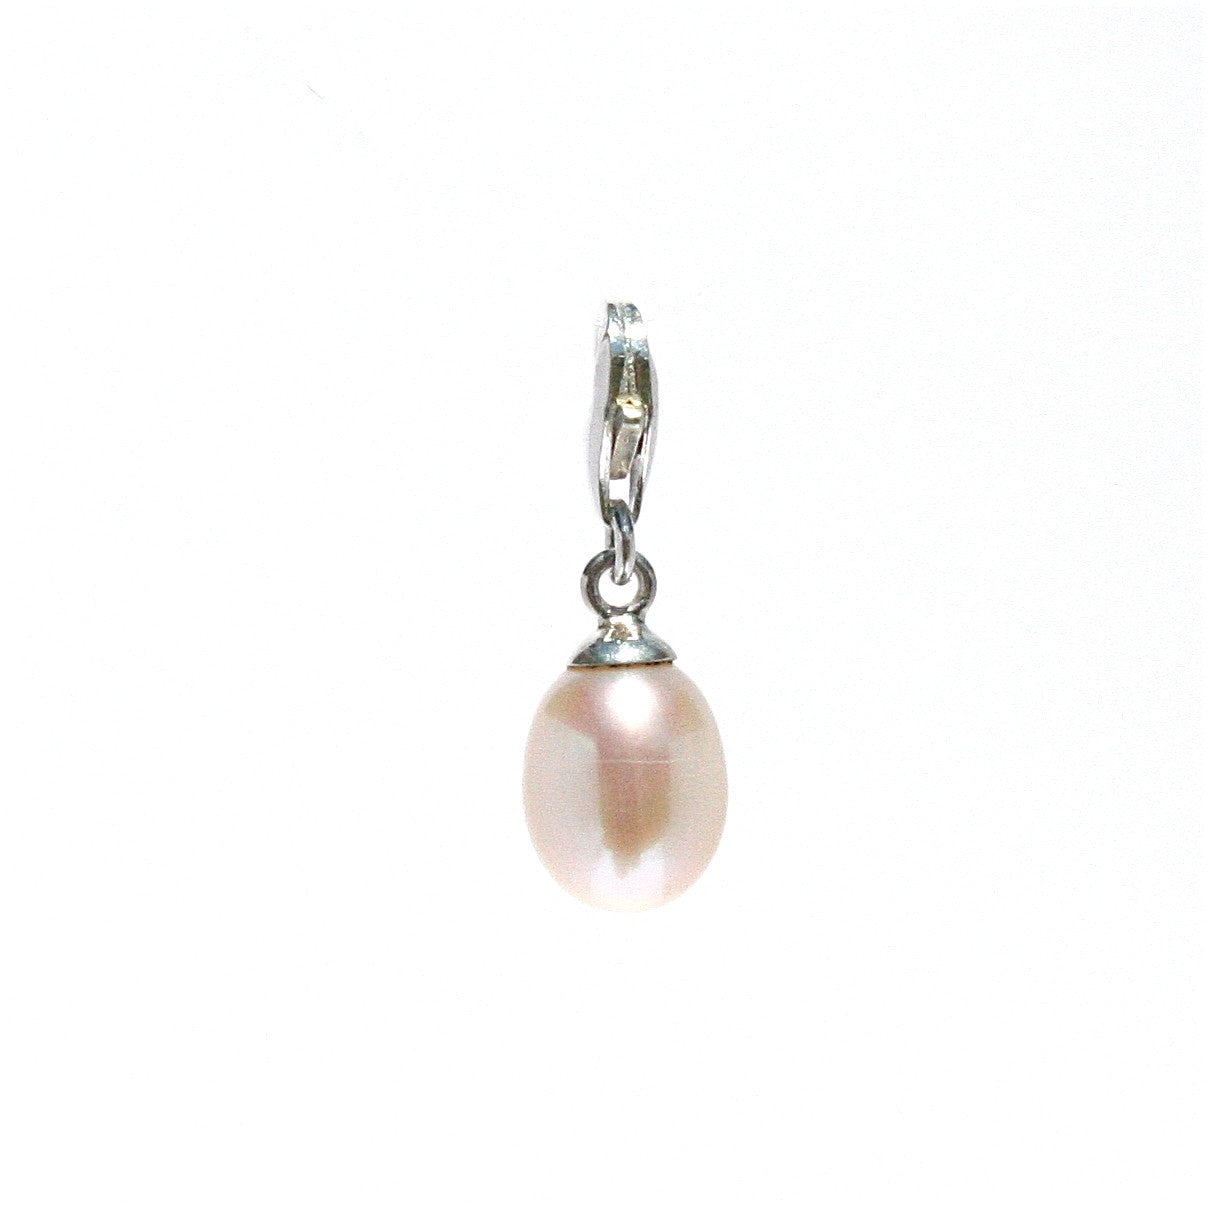 PINK PEARL CHARM ON STERLING SILVER LOBSTER CLASP